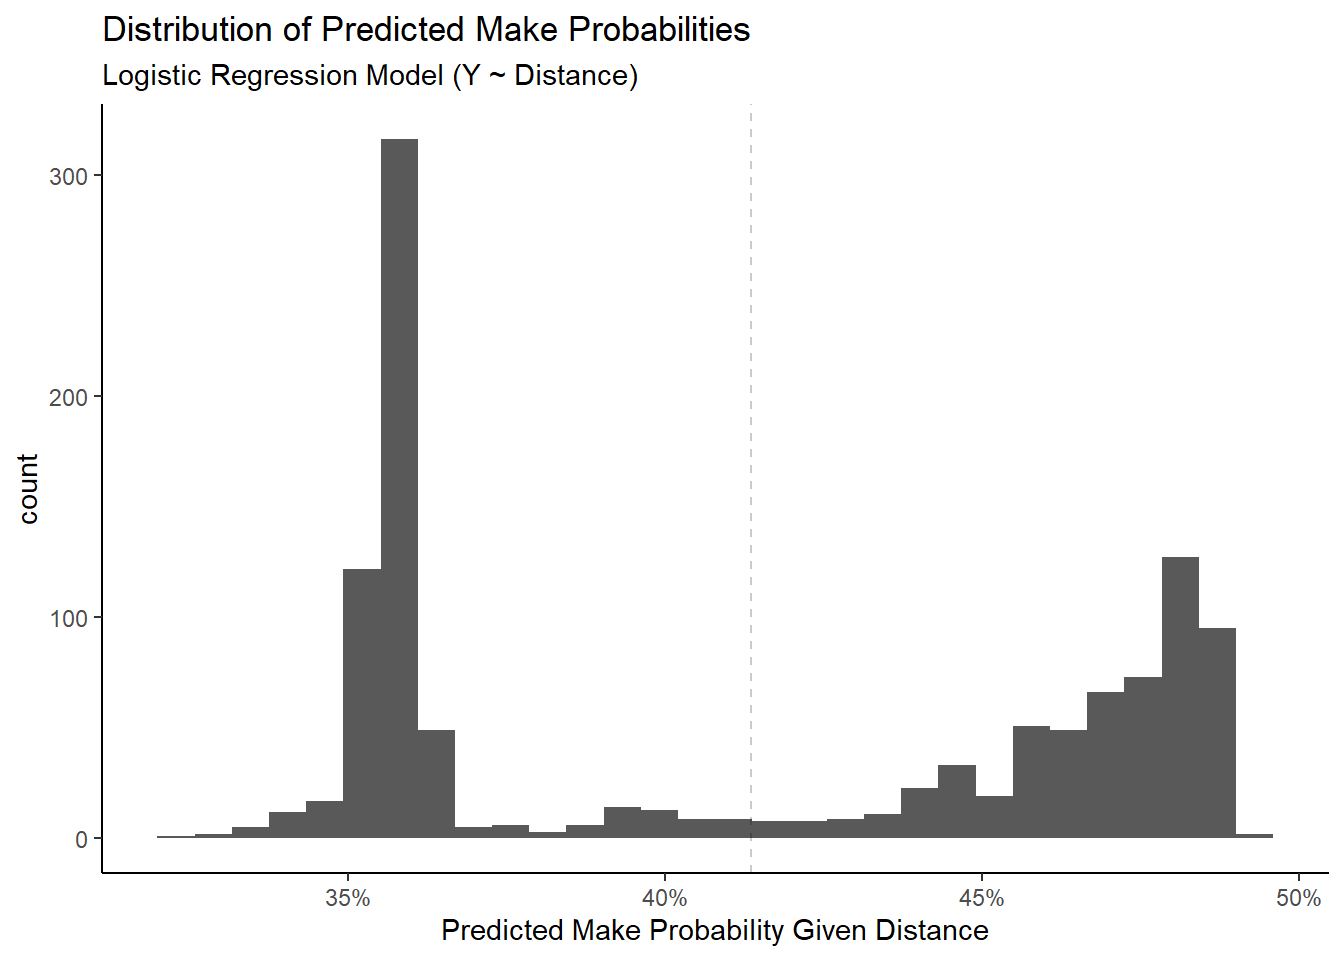 All predicted probabilities are also below 50%